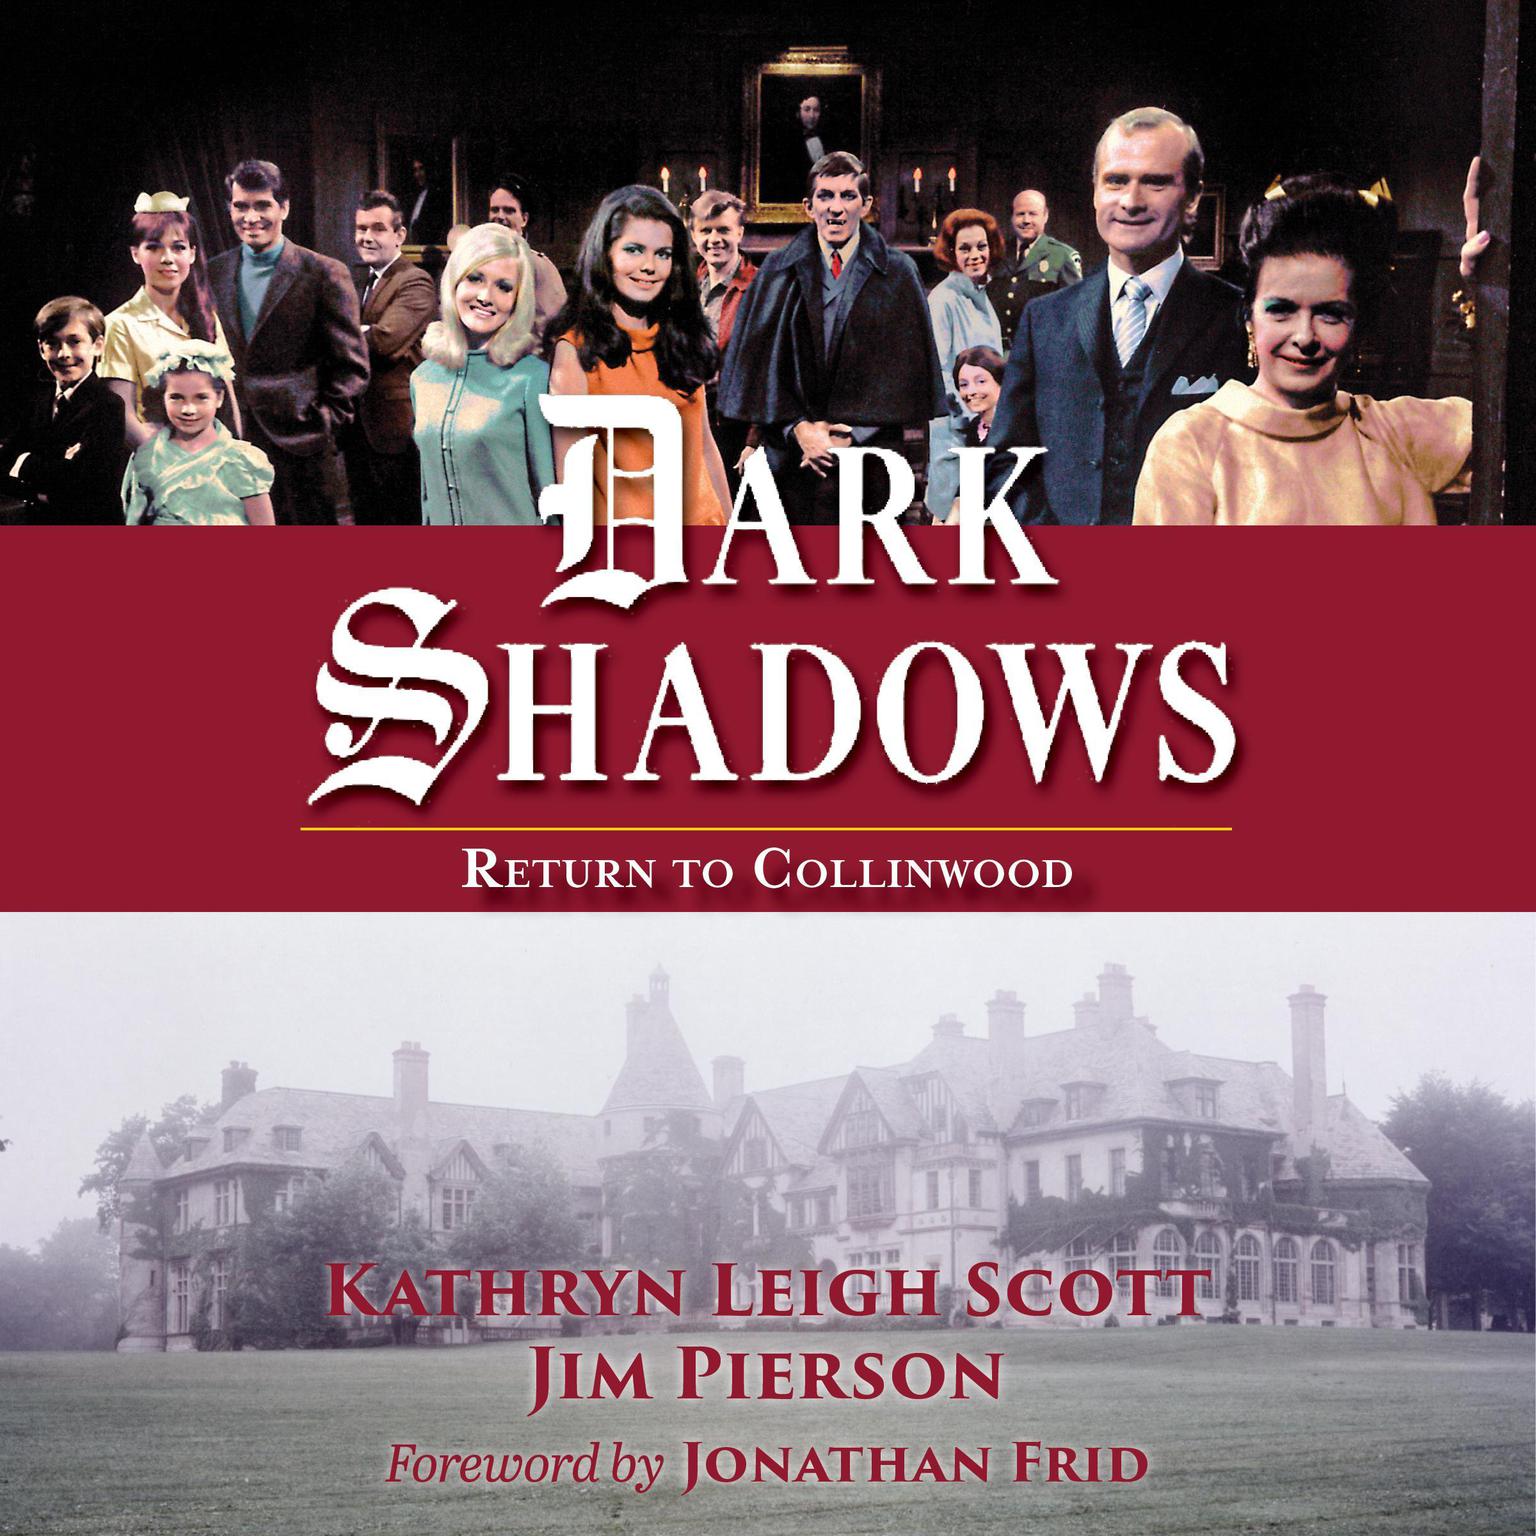 Dark Shadows: Return to Collinwood: Return to Collinwood - 50th Anniversary Anthology Audiobook, by Kathryn Leigh Scott